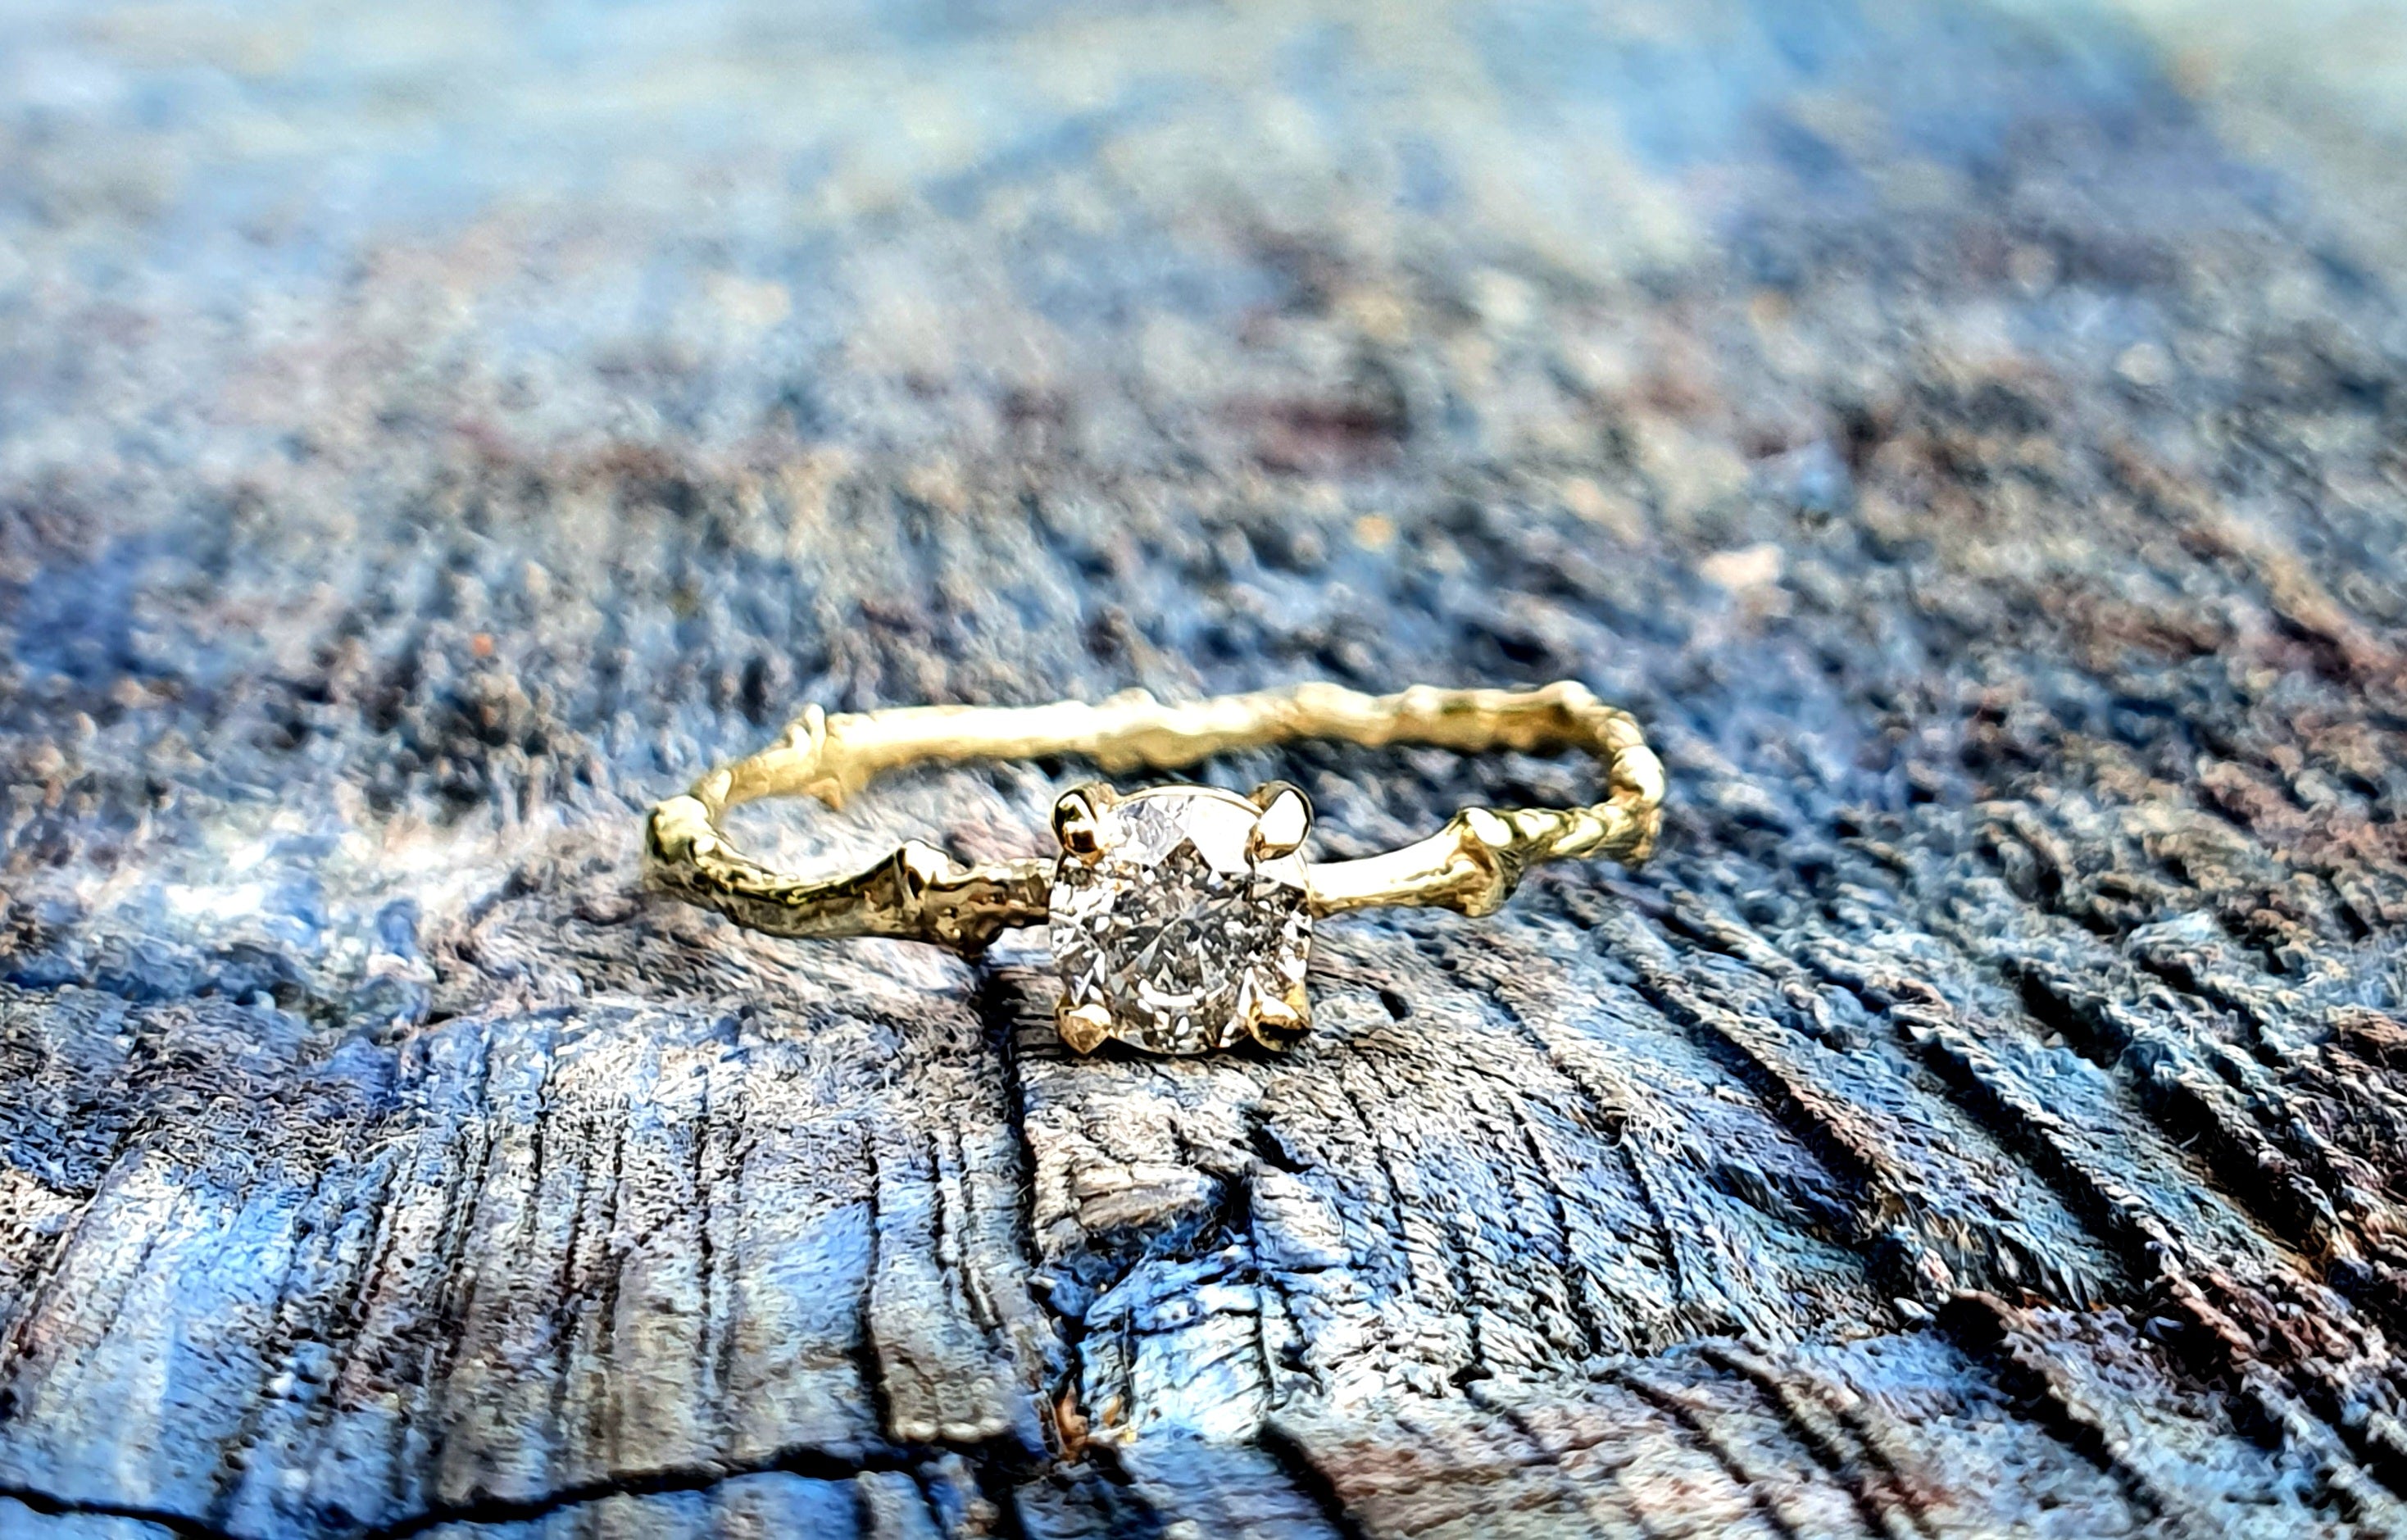 Twilight Twiglet Ring - 9k gold and salt and pepper diamond ring